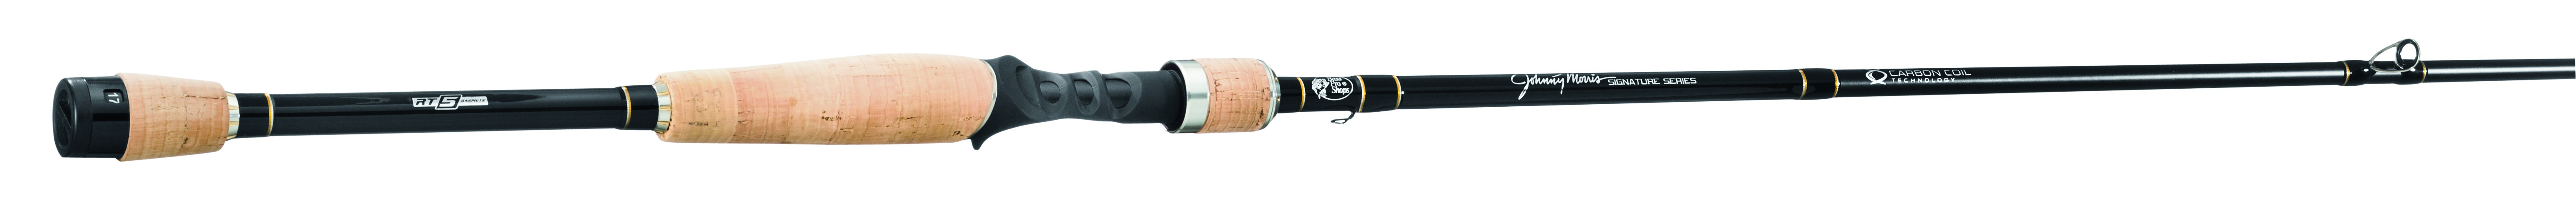 Get the advantage with Johnny Morris Signature Series Fishing Rods